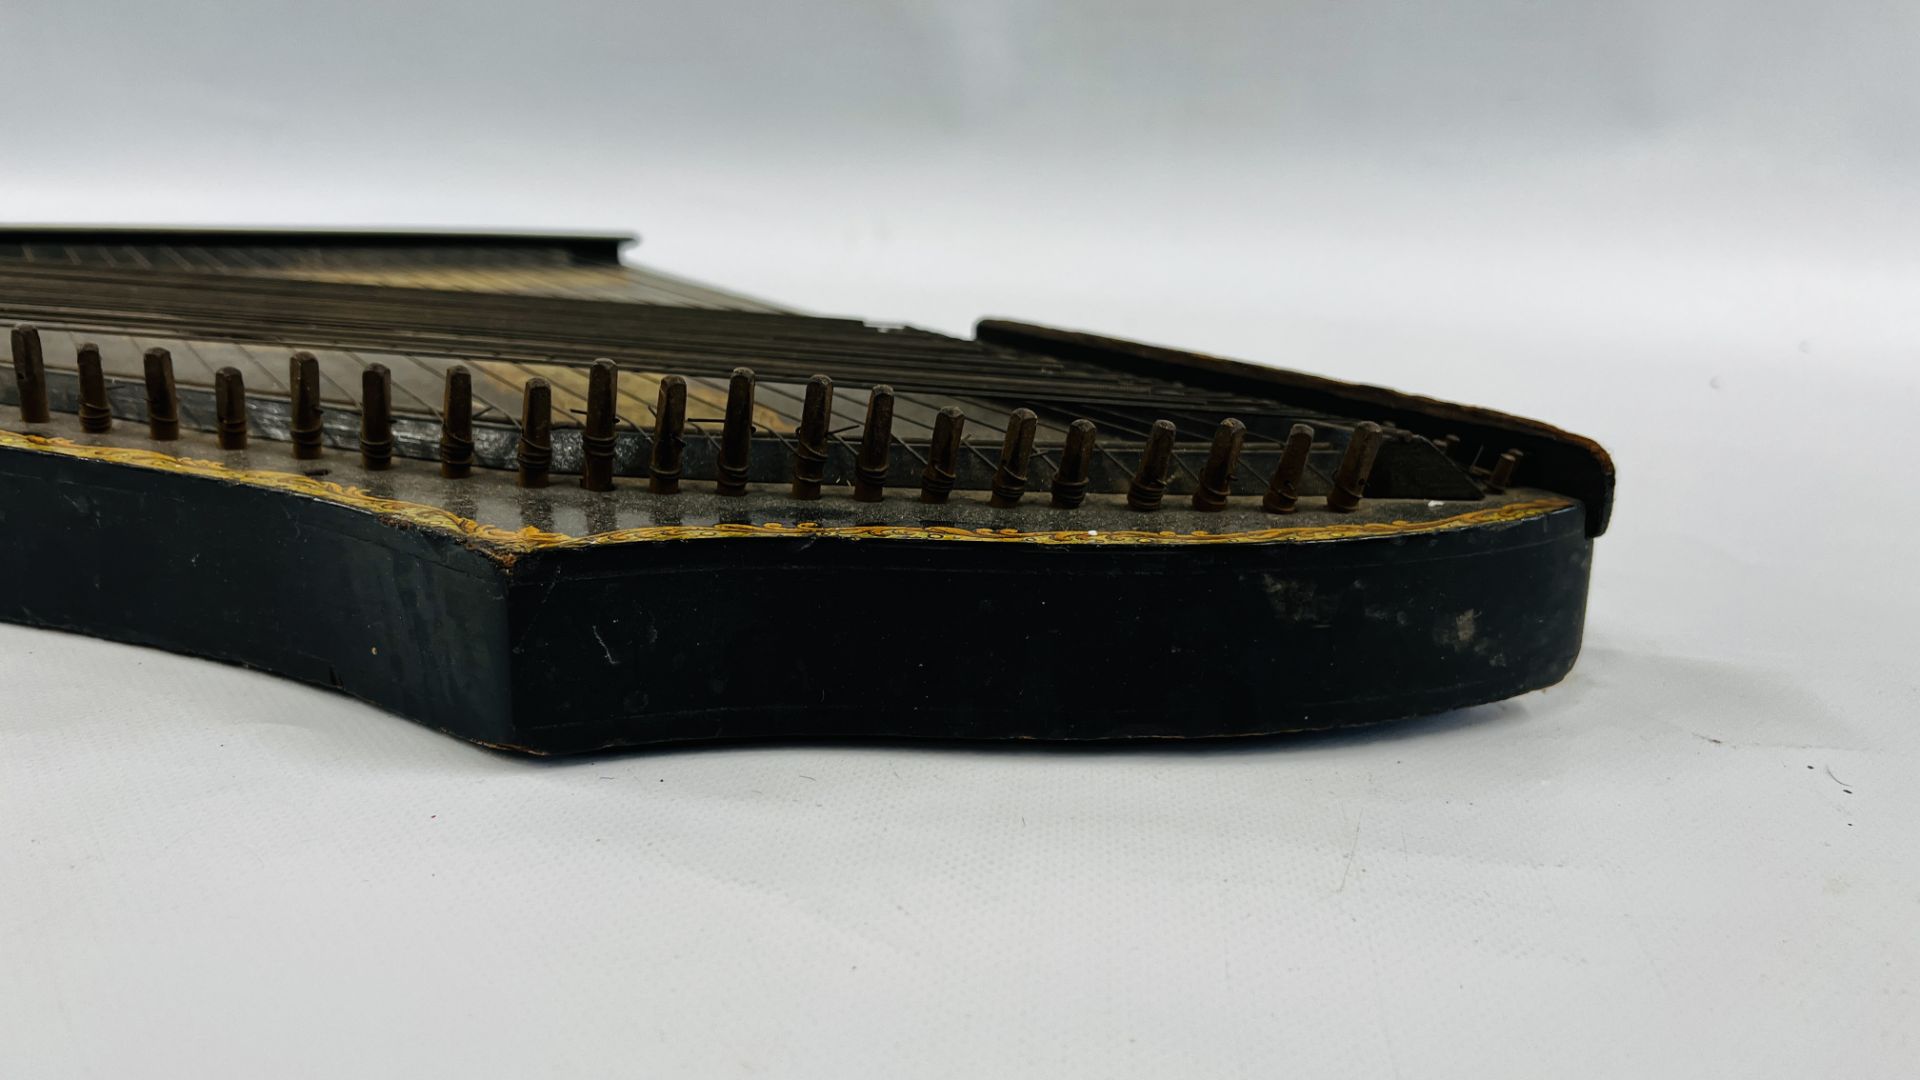 A VINTAGE "THE ANGLO AMERICAN LION ZITHER" MANUFACTURED BY THE ANGLO AMERICAN ZITHER Co NEW YORK - Image 10 of 13